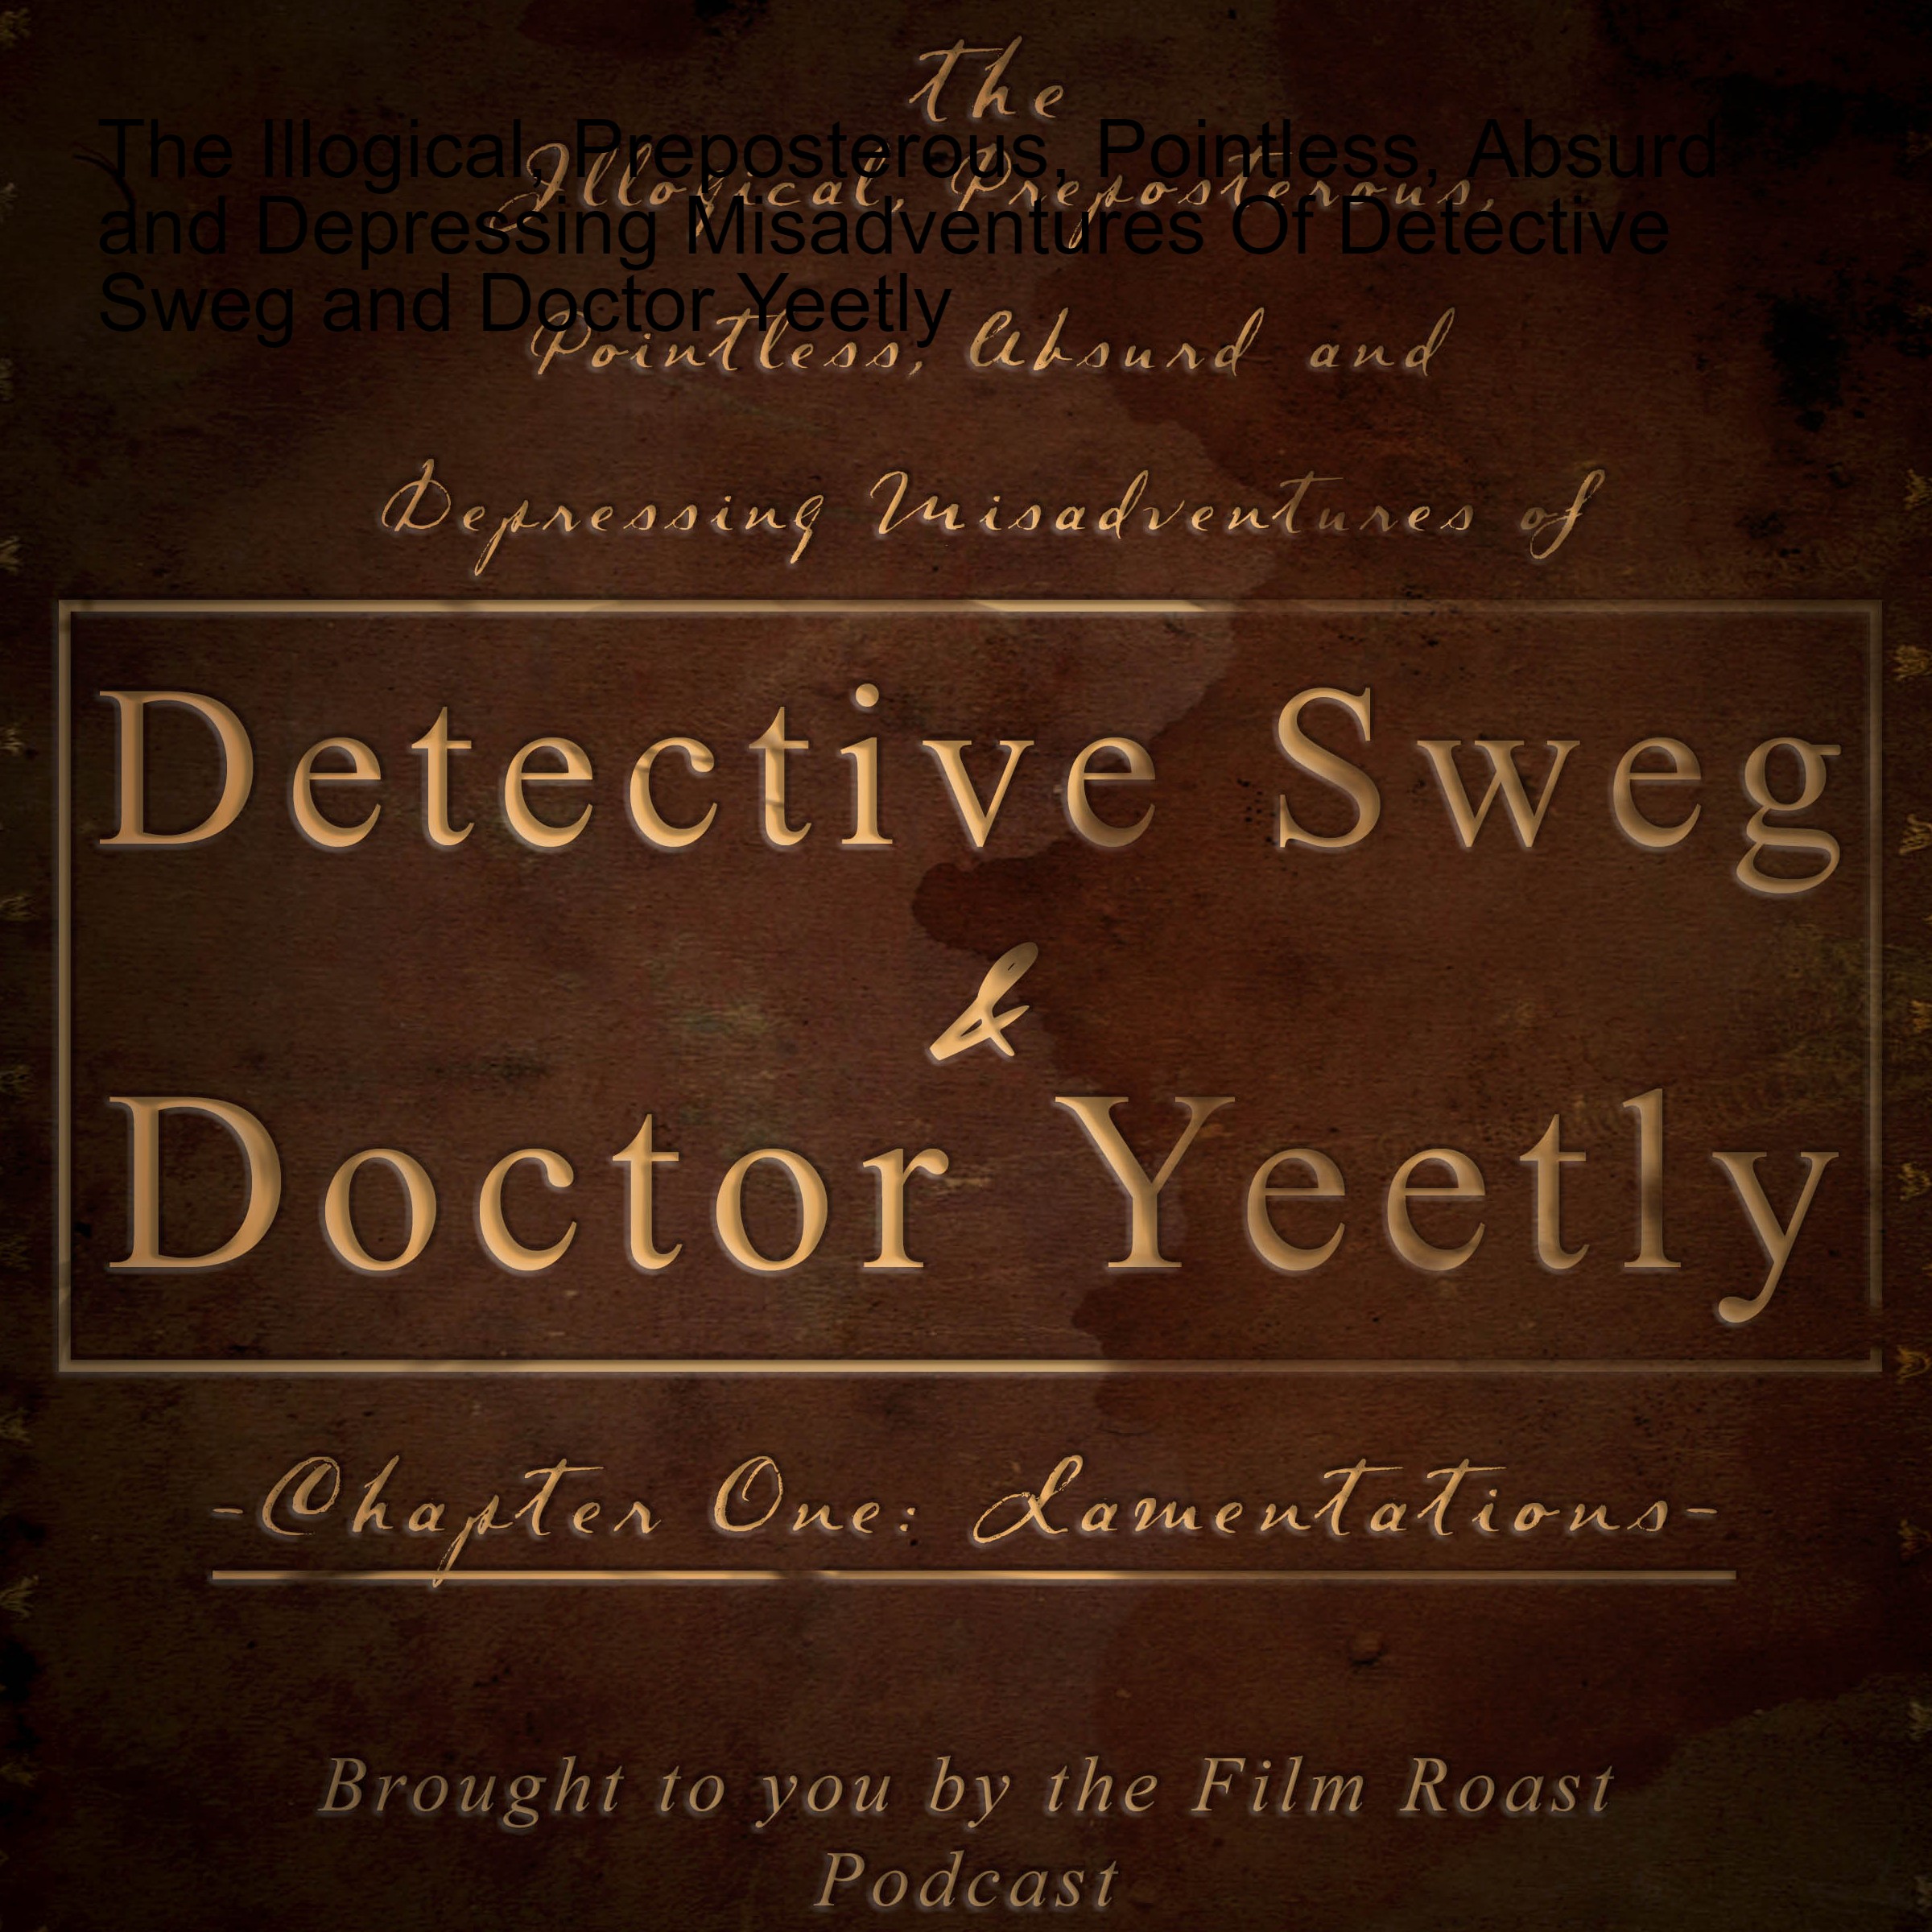 The Illogical, Preposterous, Pointless, Absurd and Depressing Misadventures Of Detective Sweg and Doctor Yeetly